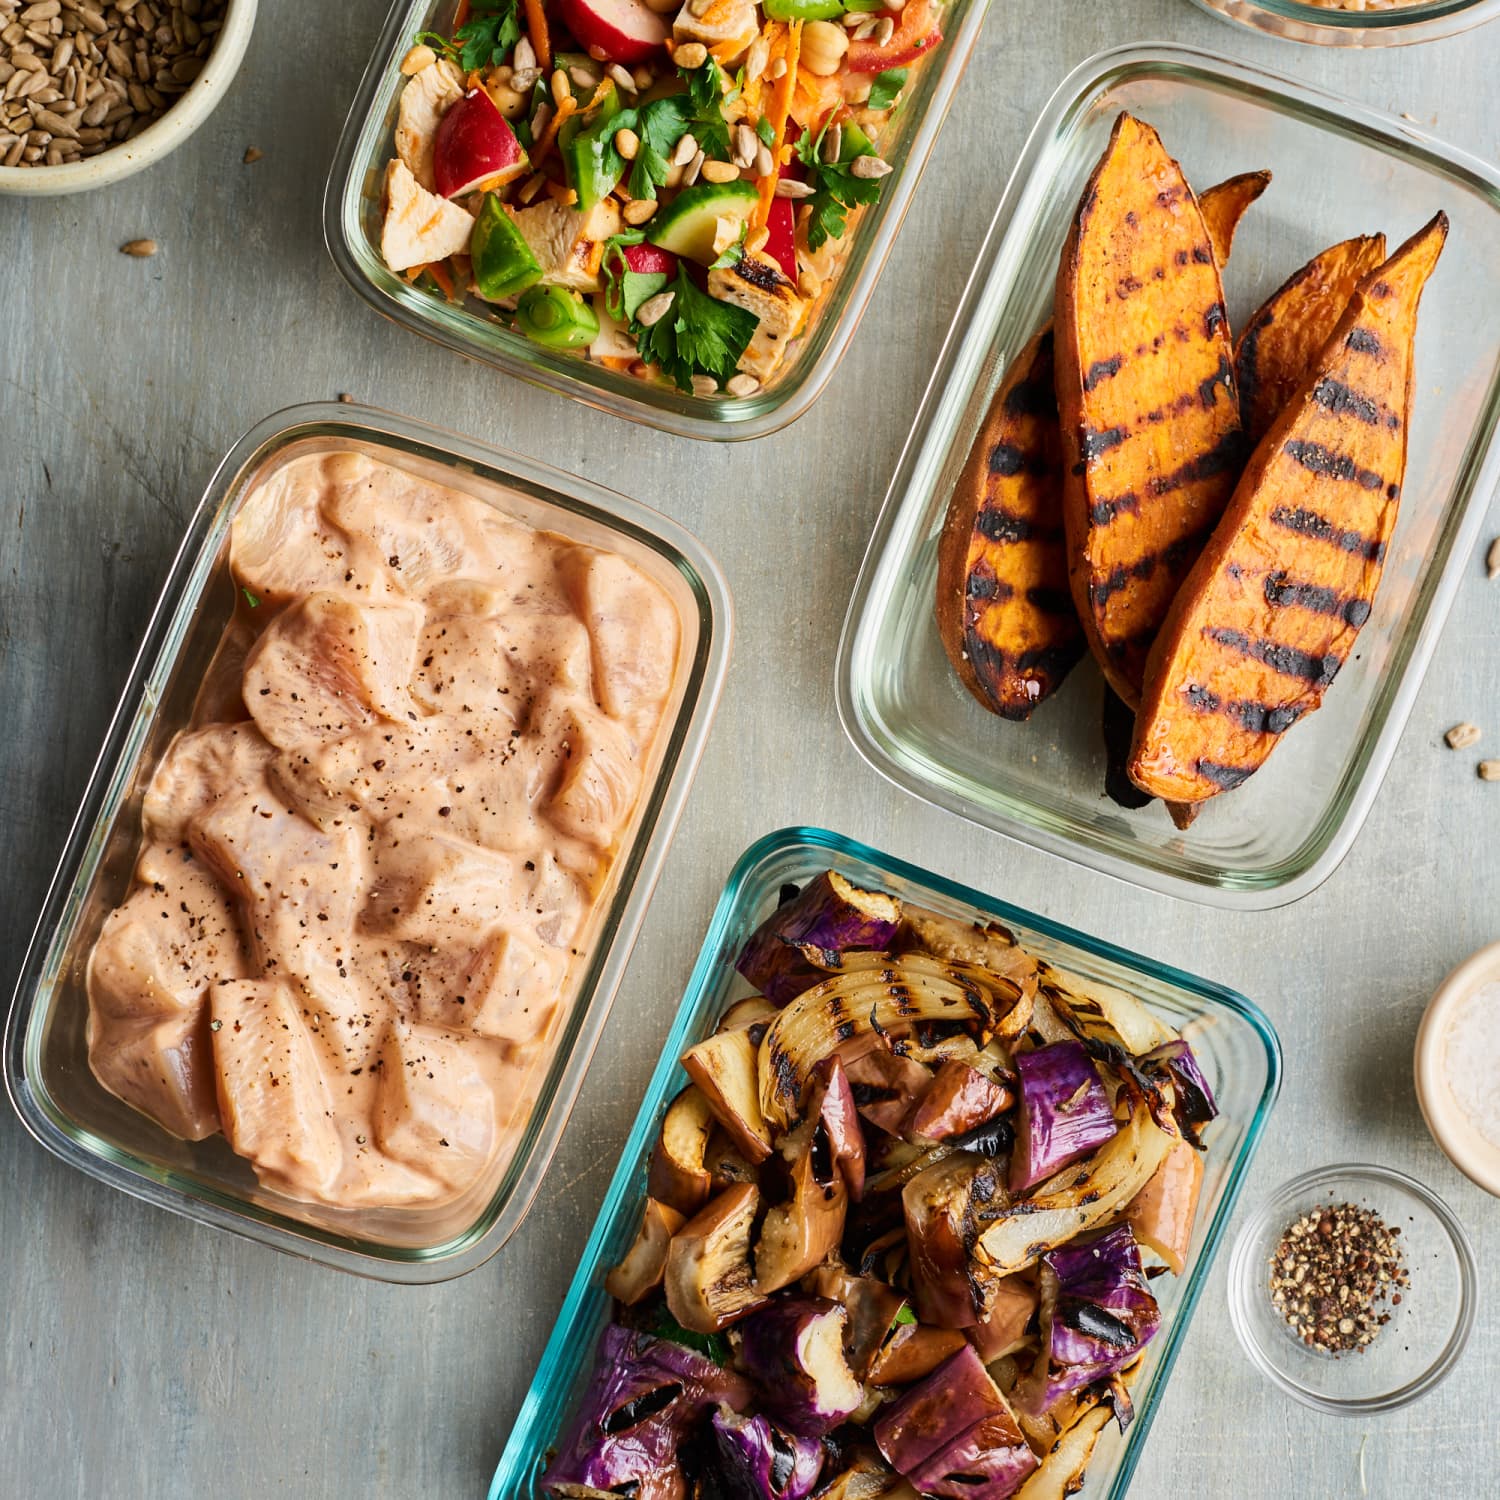 How Home Meal Kits Are Making Family Dinner Easy